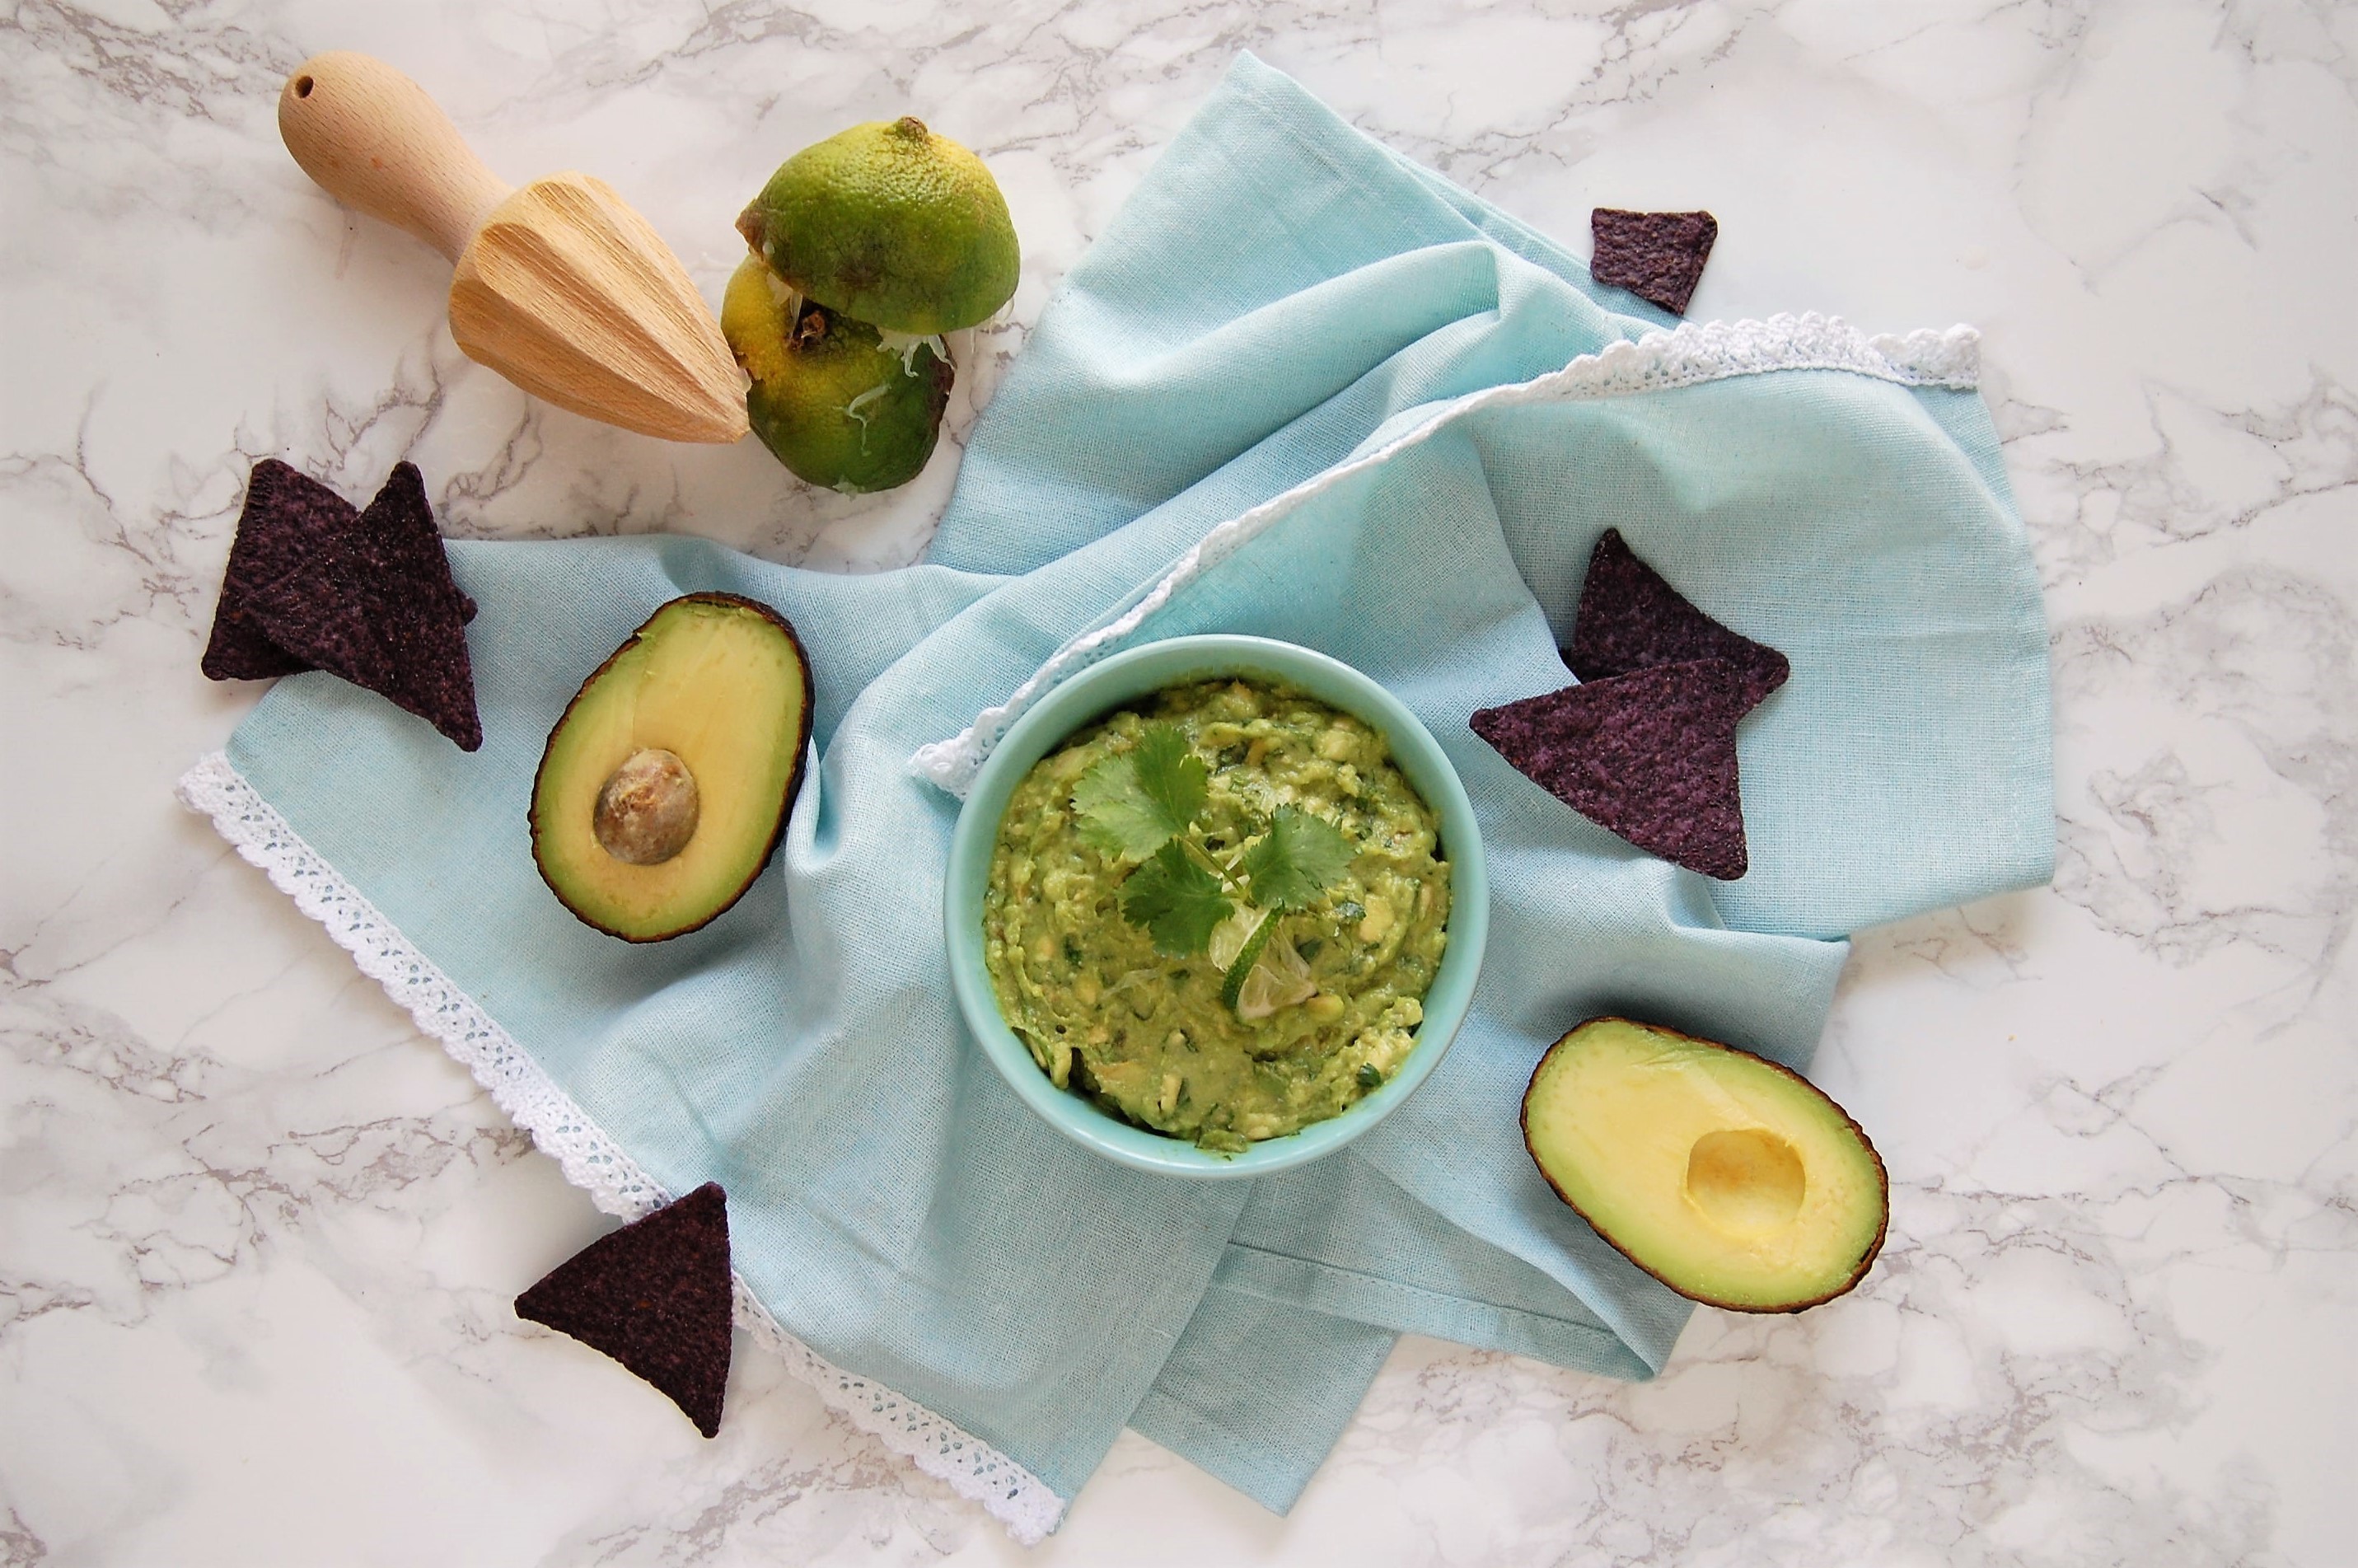 This is a super easy guacamole recipe with just three ingredients (plus salt). So easy, kid-friendly, and perfect for Cinco de Mayo and all of your summer barbecues!